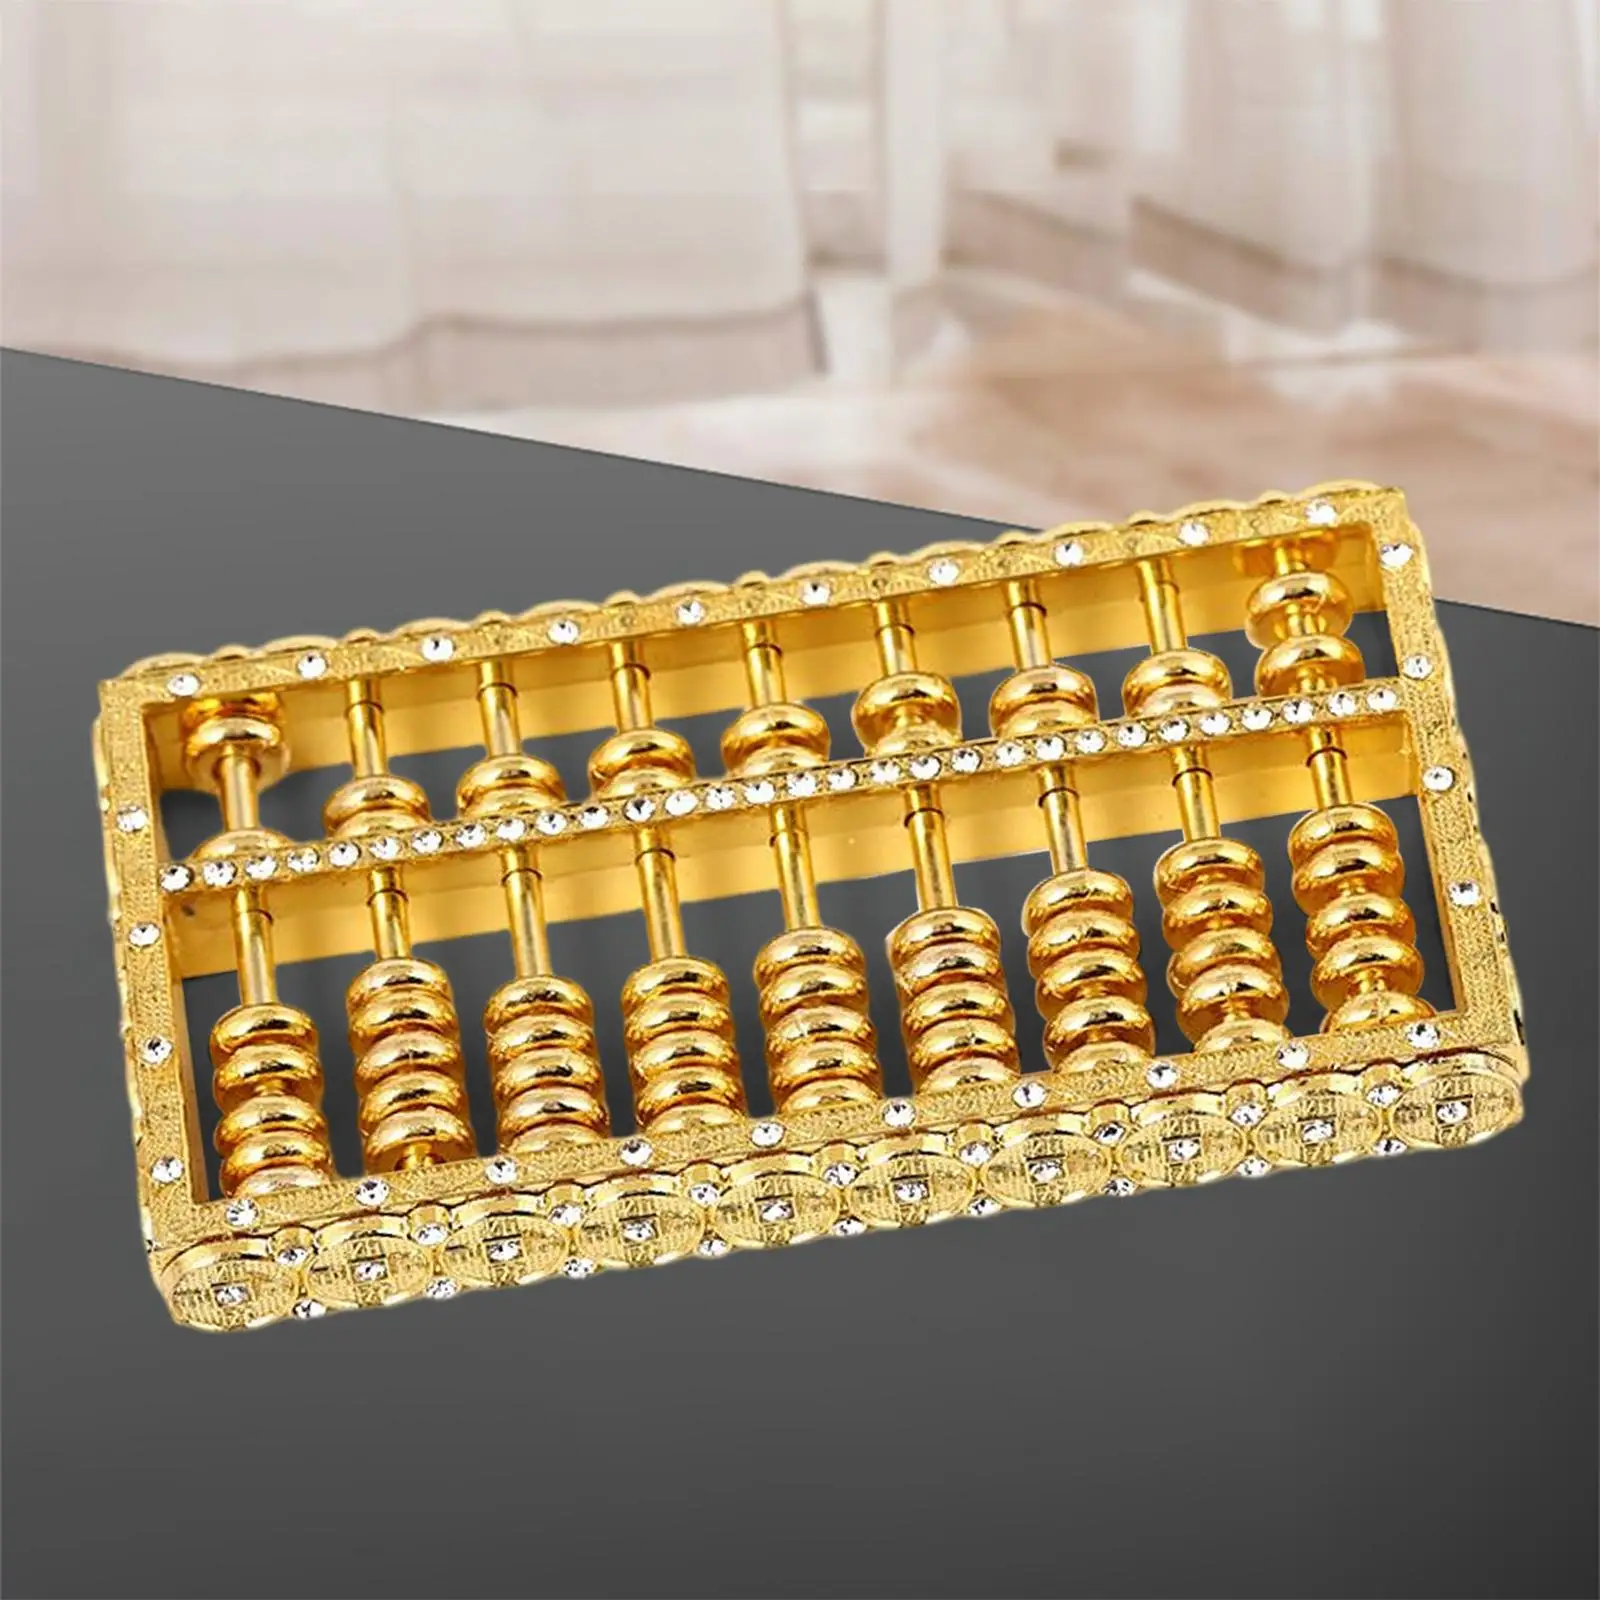 Fashion Abacus Decoration Maths Learning Toy Educational Counting Bead Abacus for Jewelry Making Accessory DIY Desktop Decor